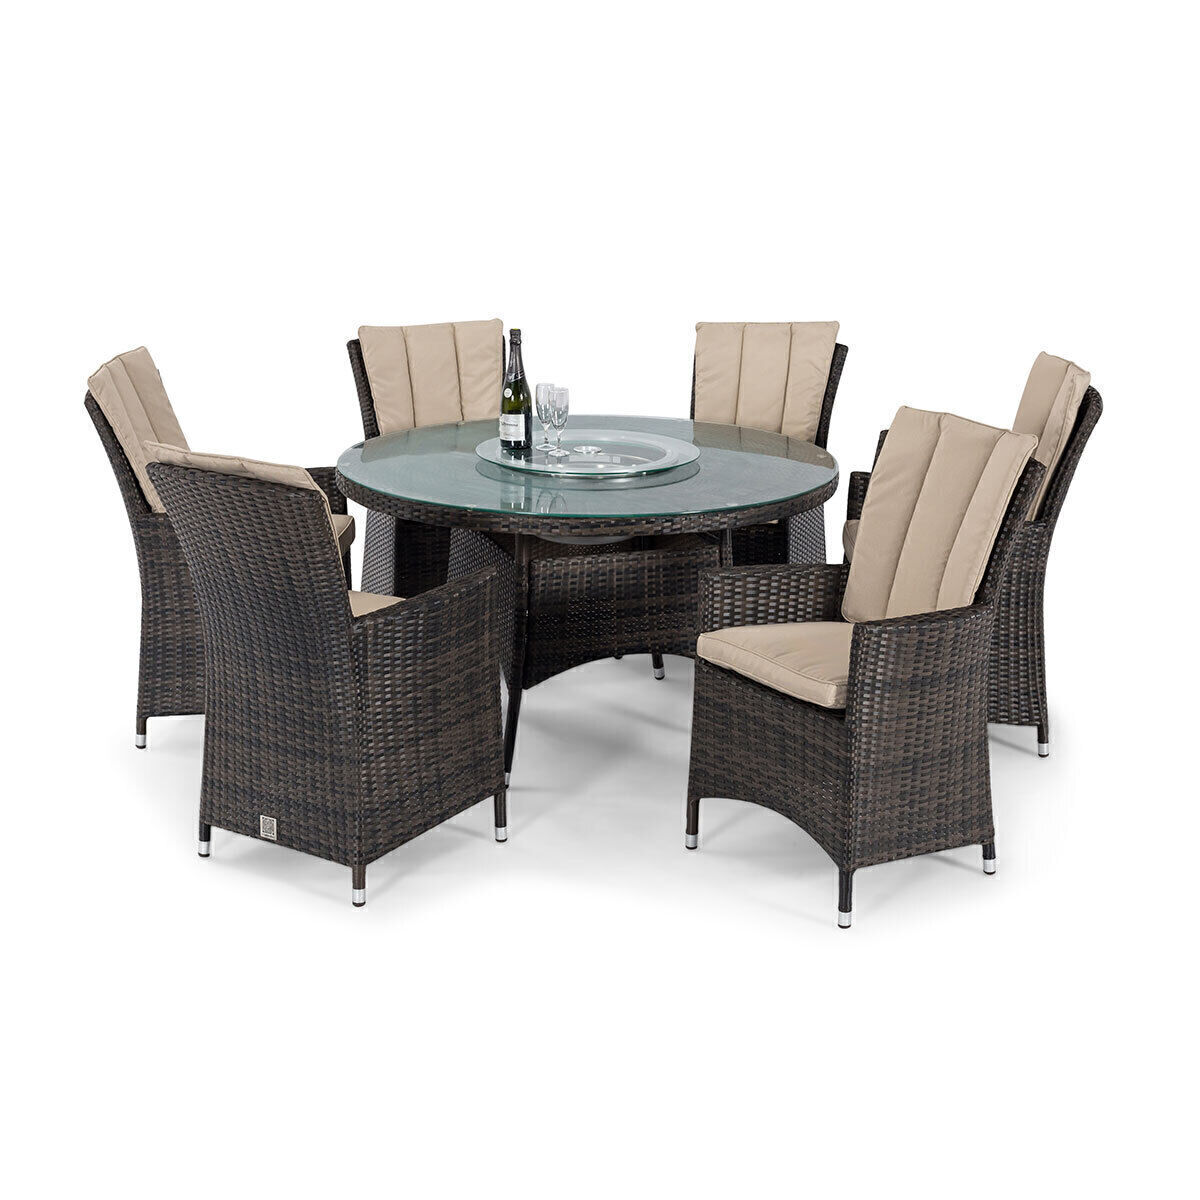 Maze - LA 6 Seat Round Rattan Dining Set with Ice Bucket - Brown product image